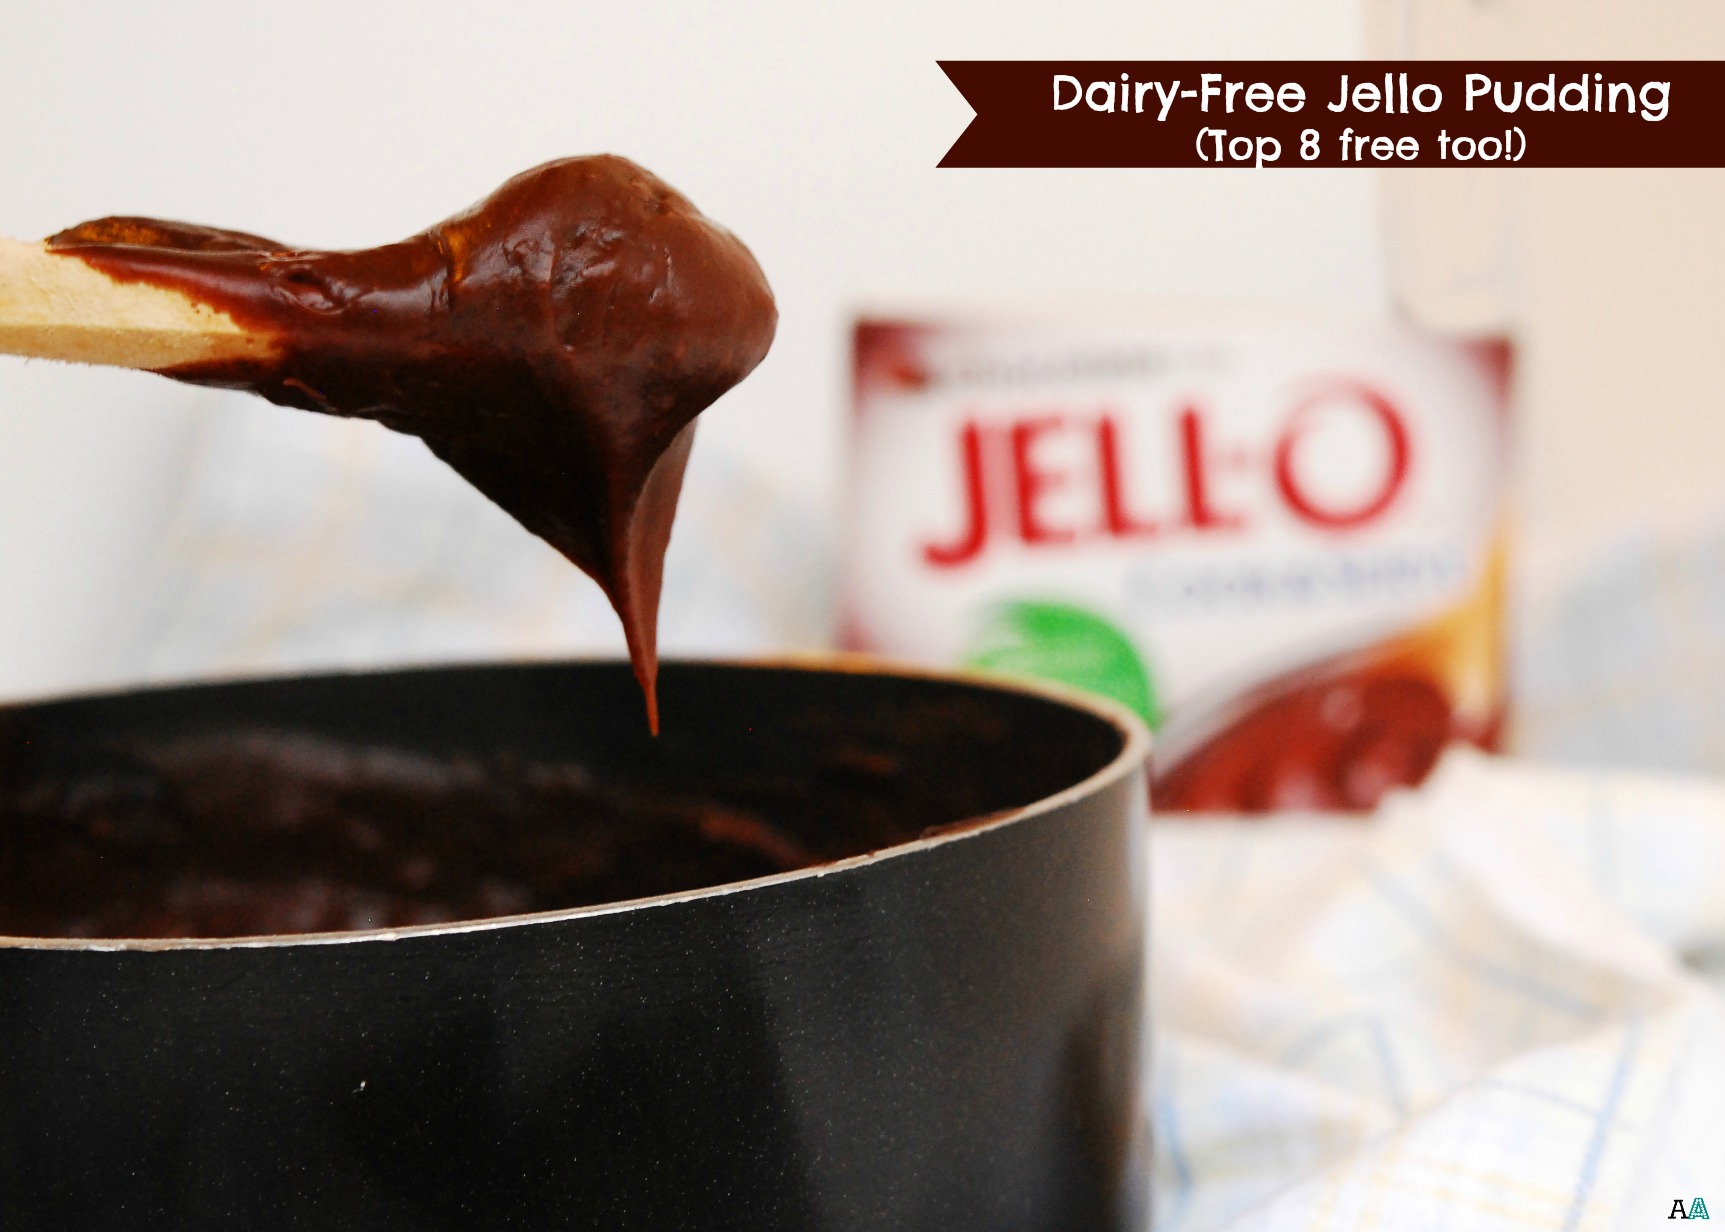 How to Make Jello Pudding Allergy-friendly